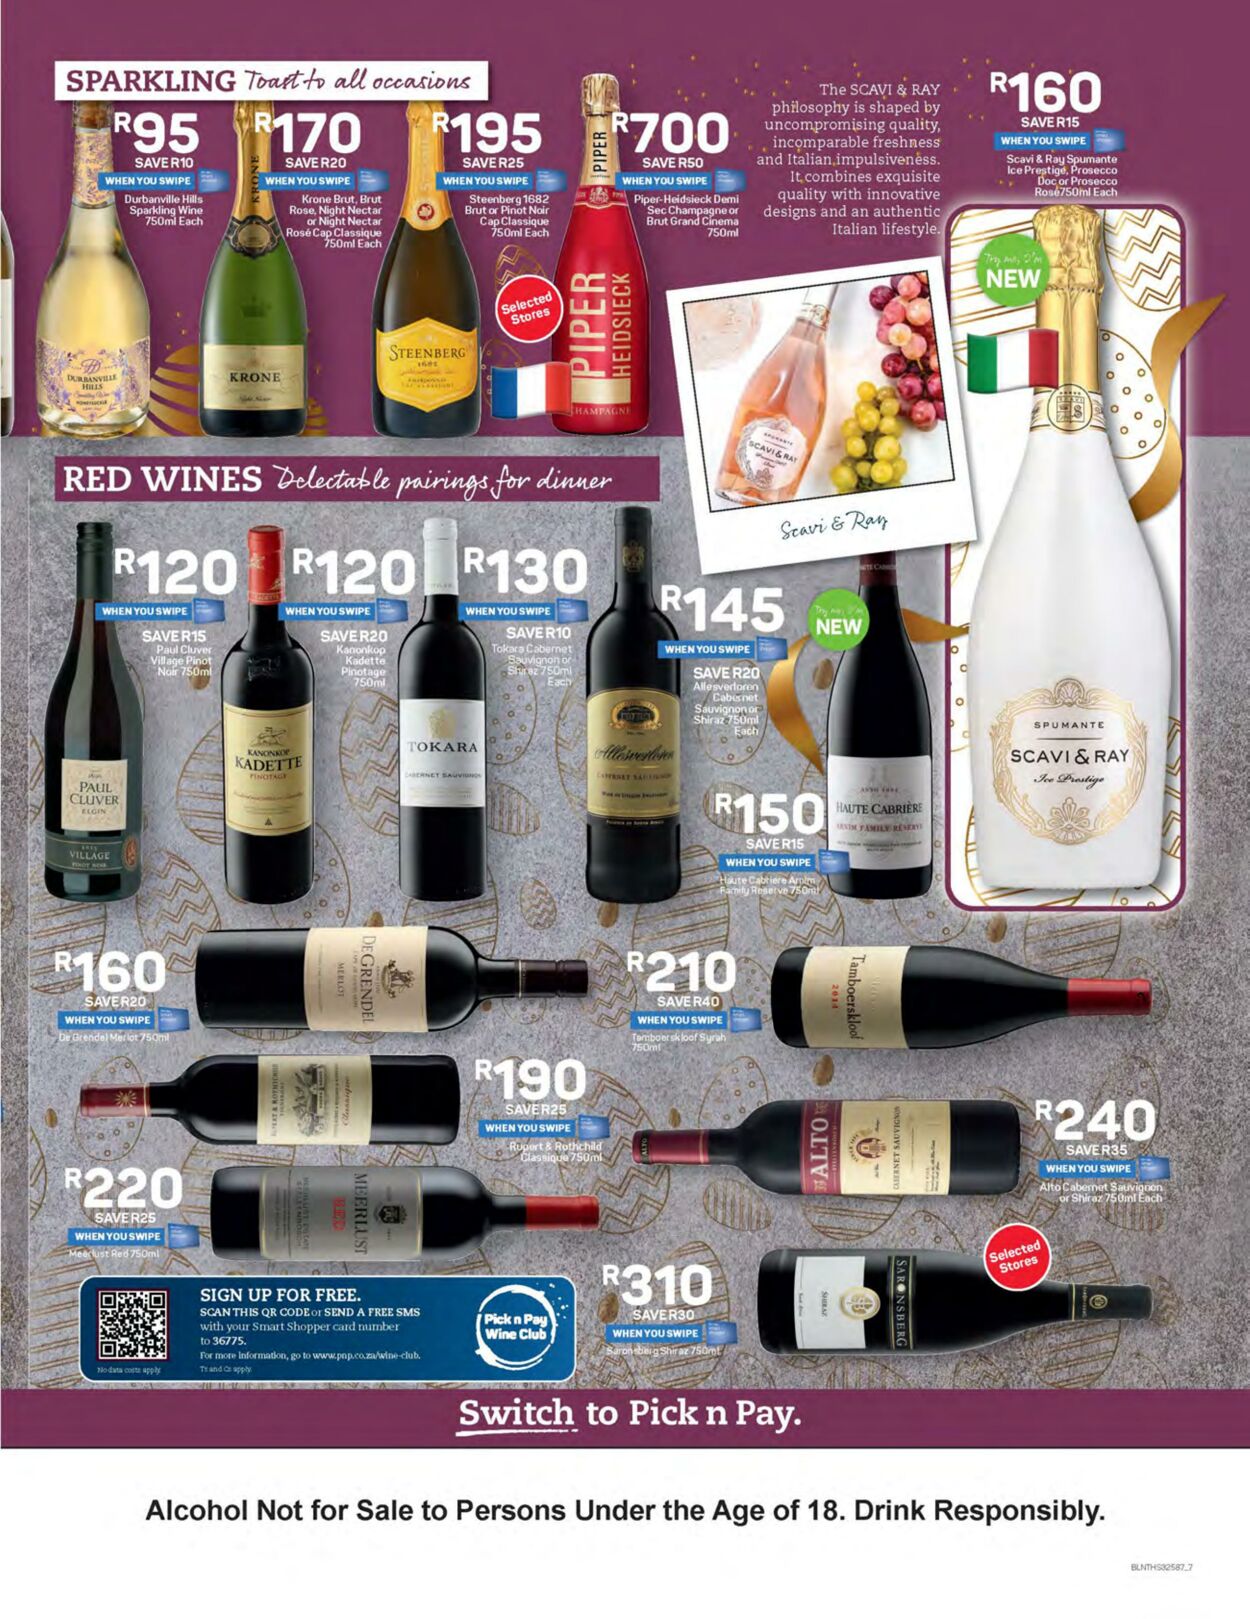 Special Pick n Pay 27.03.2023 - 02.04.2023